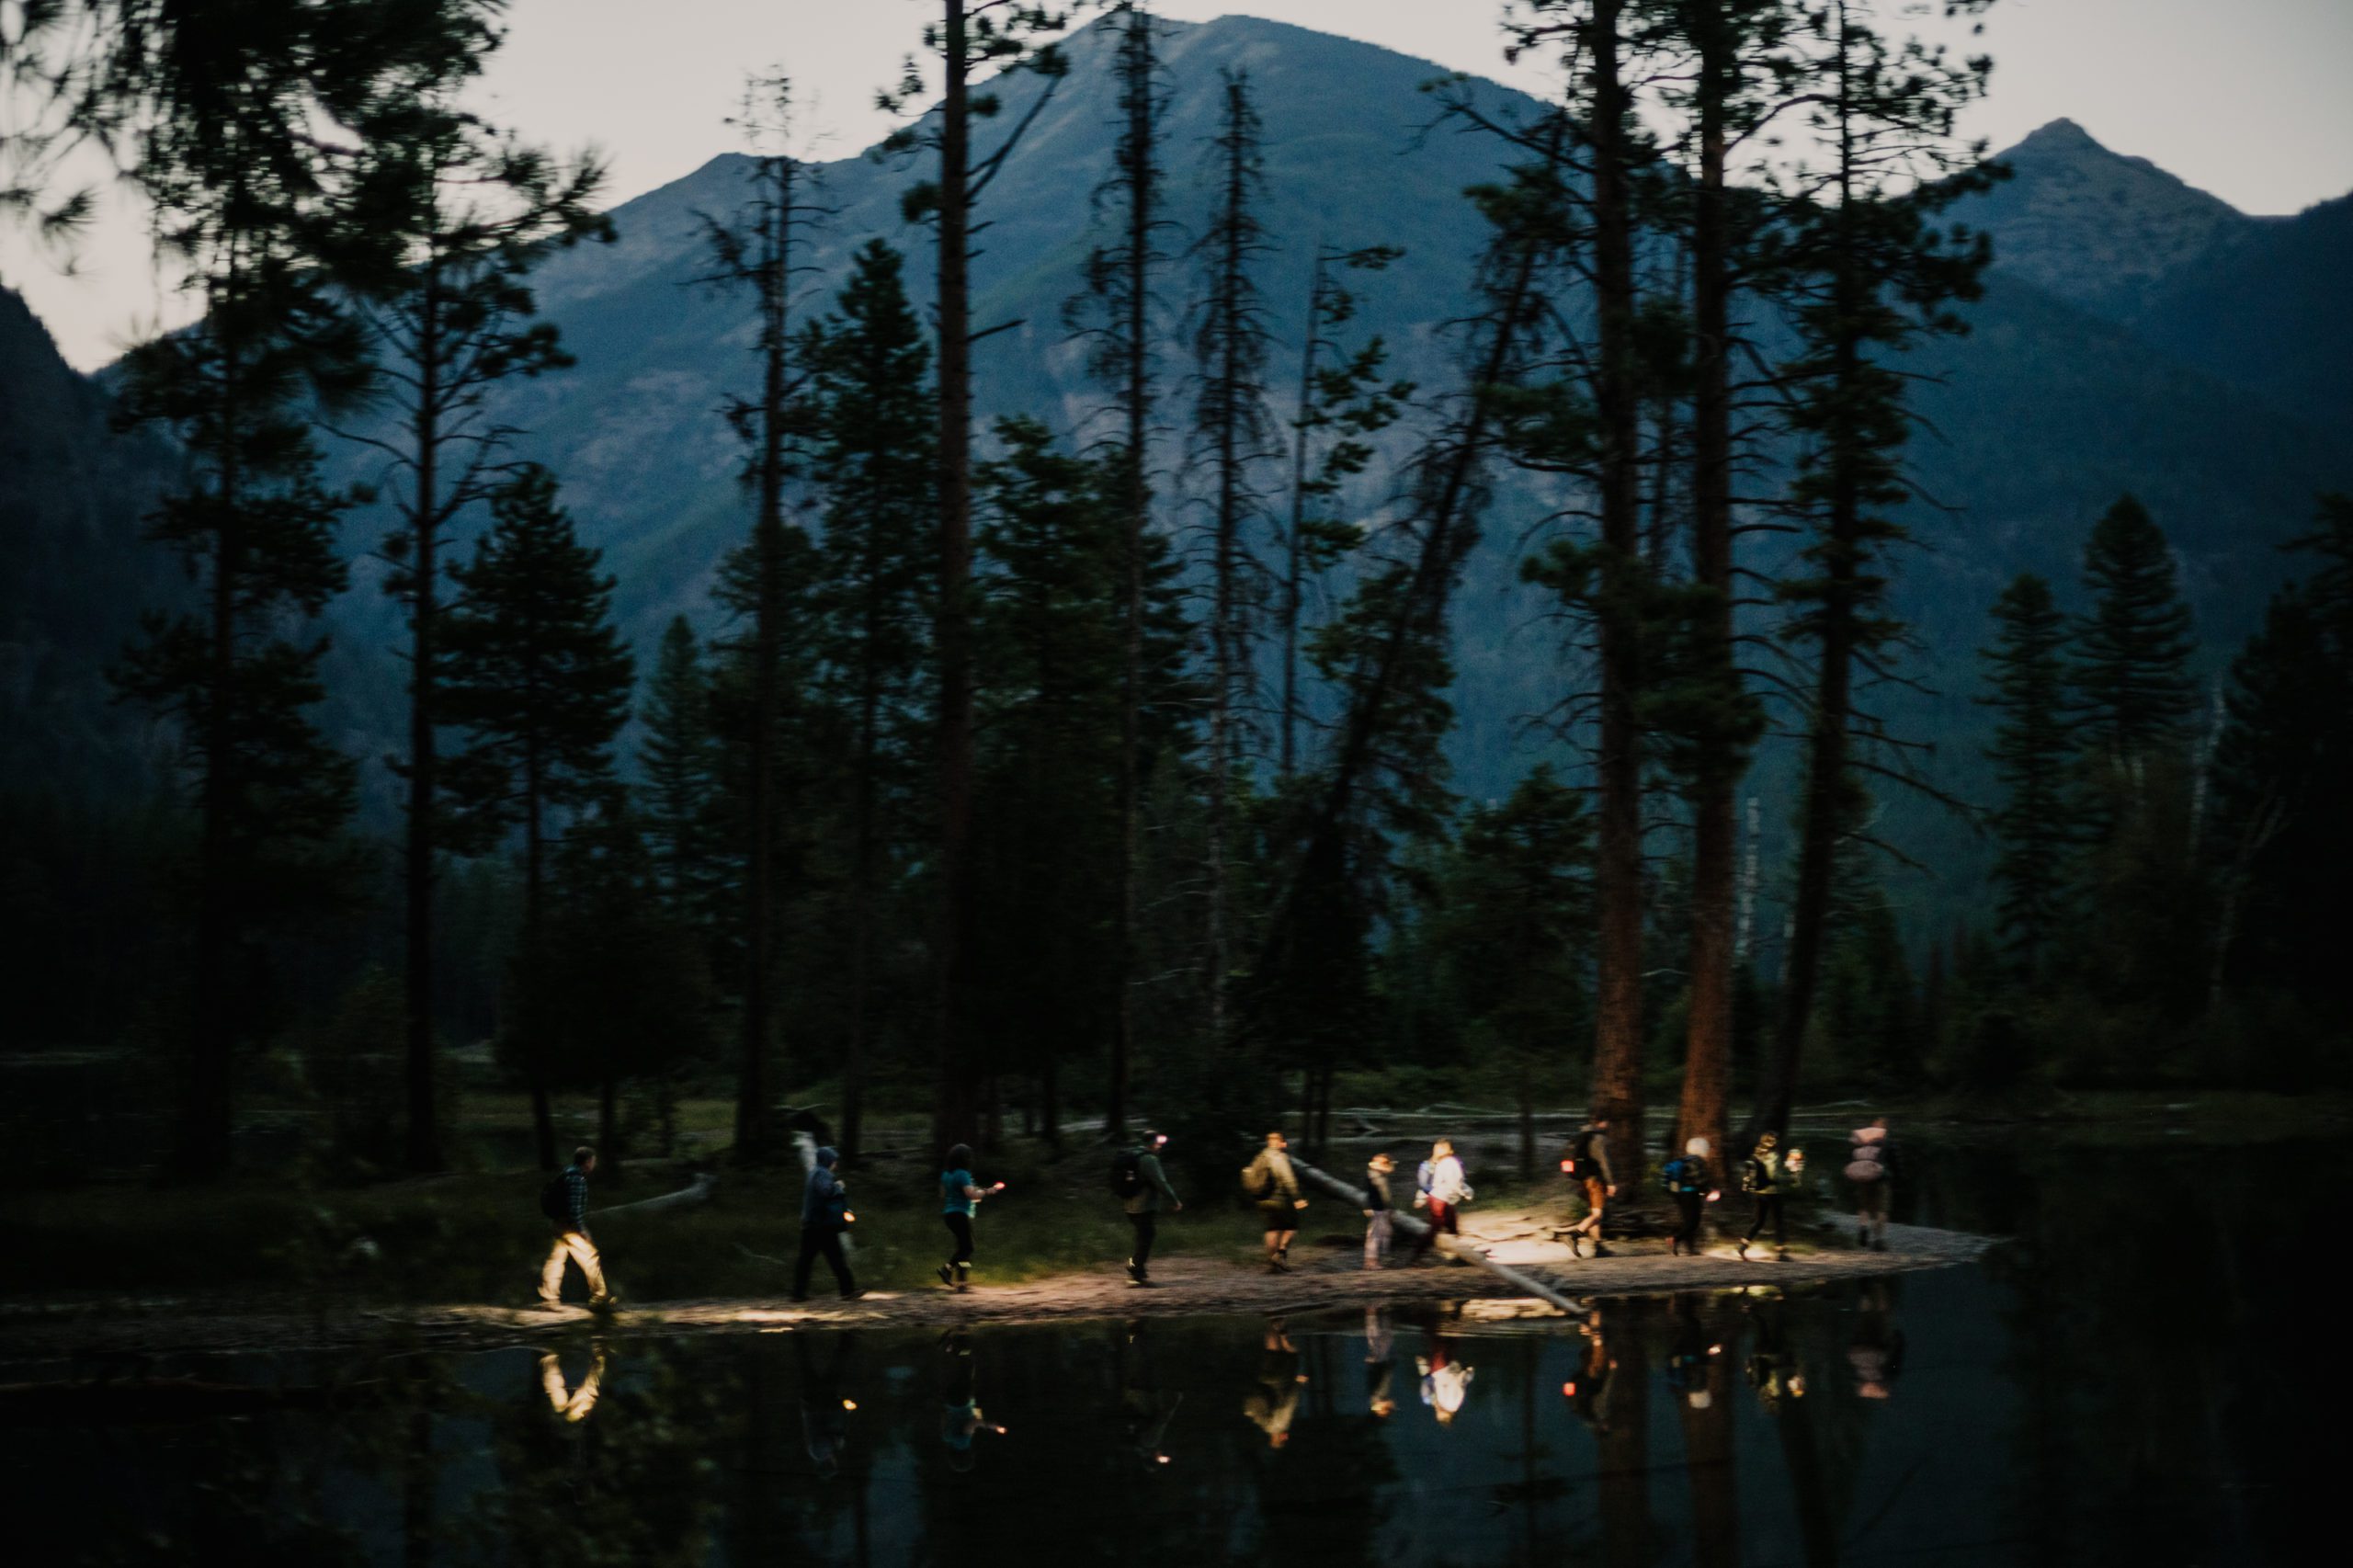 How to elope with friends and family, micro wedding in Montana, hiking with friends in Montana